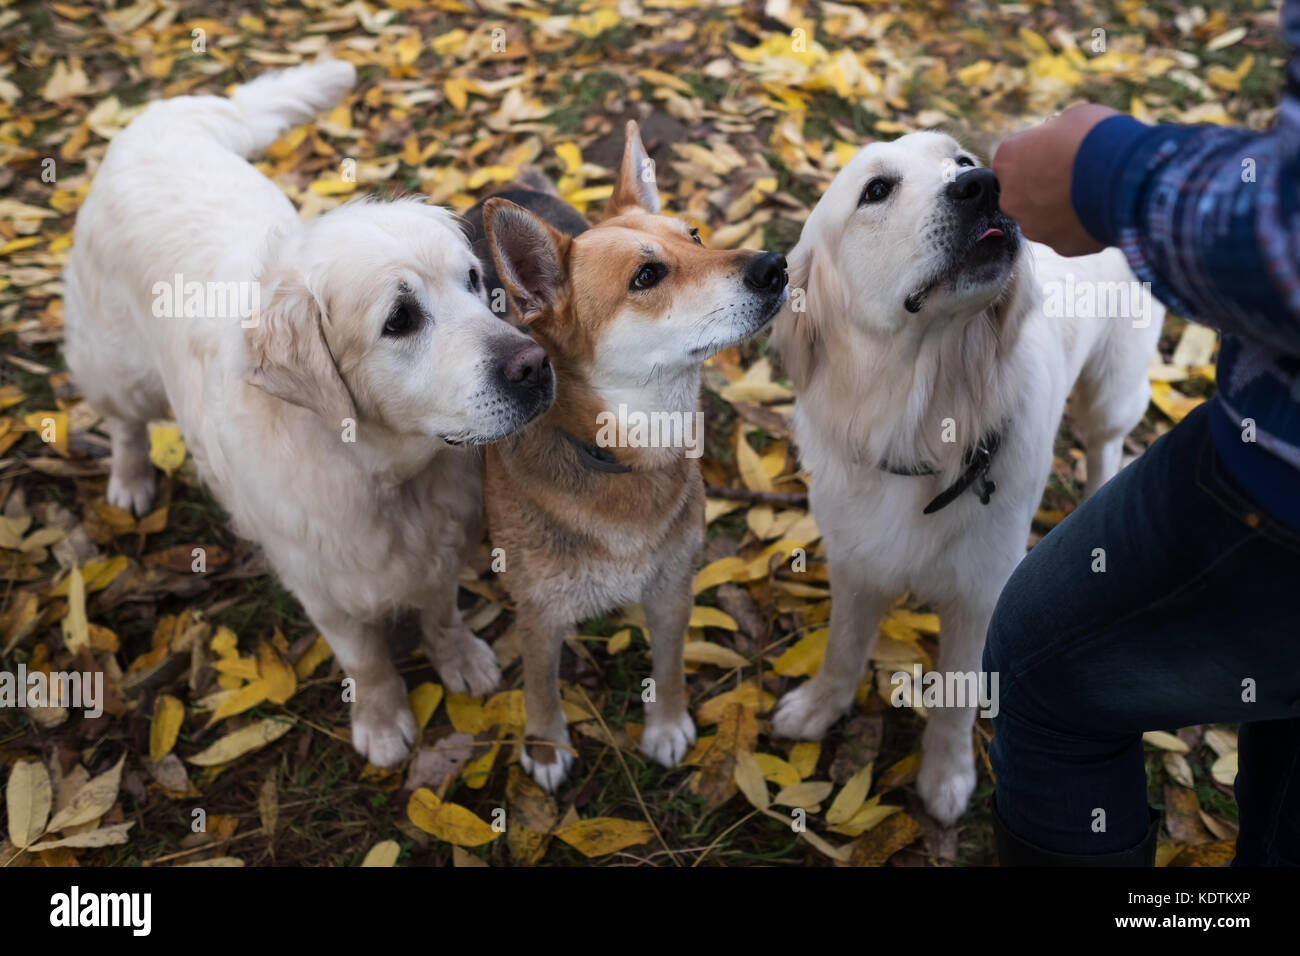 Giving golden retrievers and huskies a treat Stock Photo